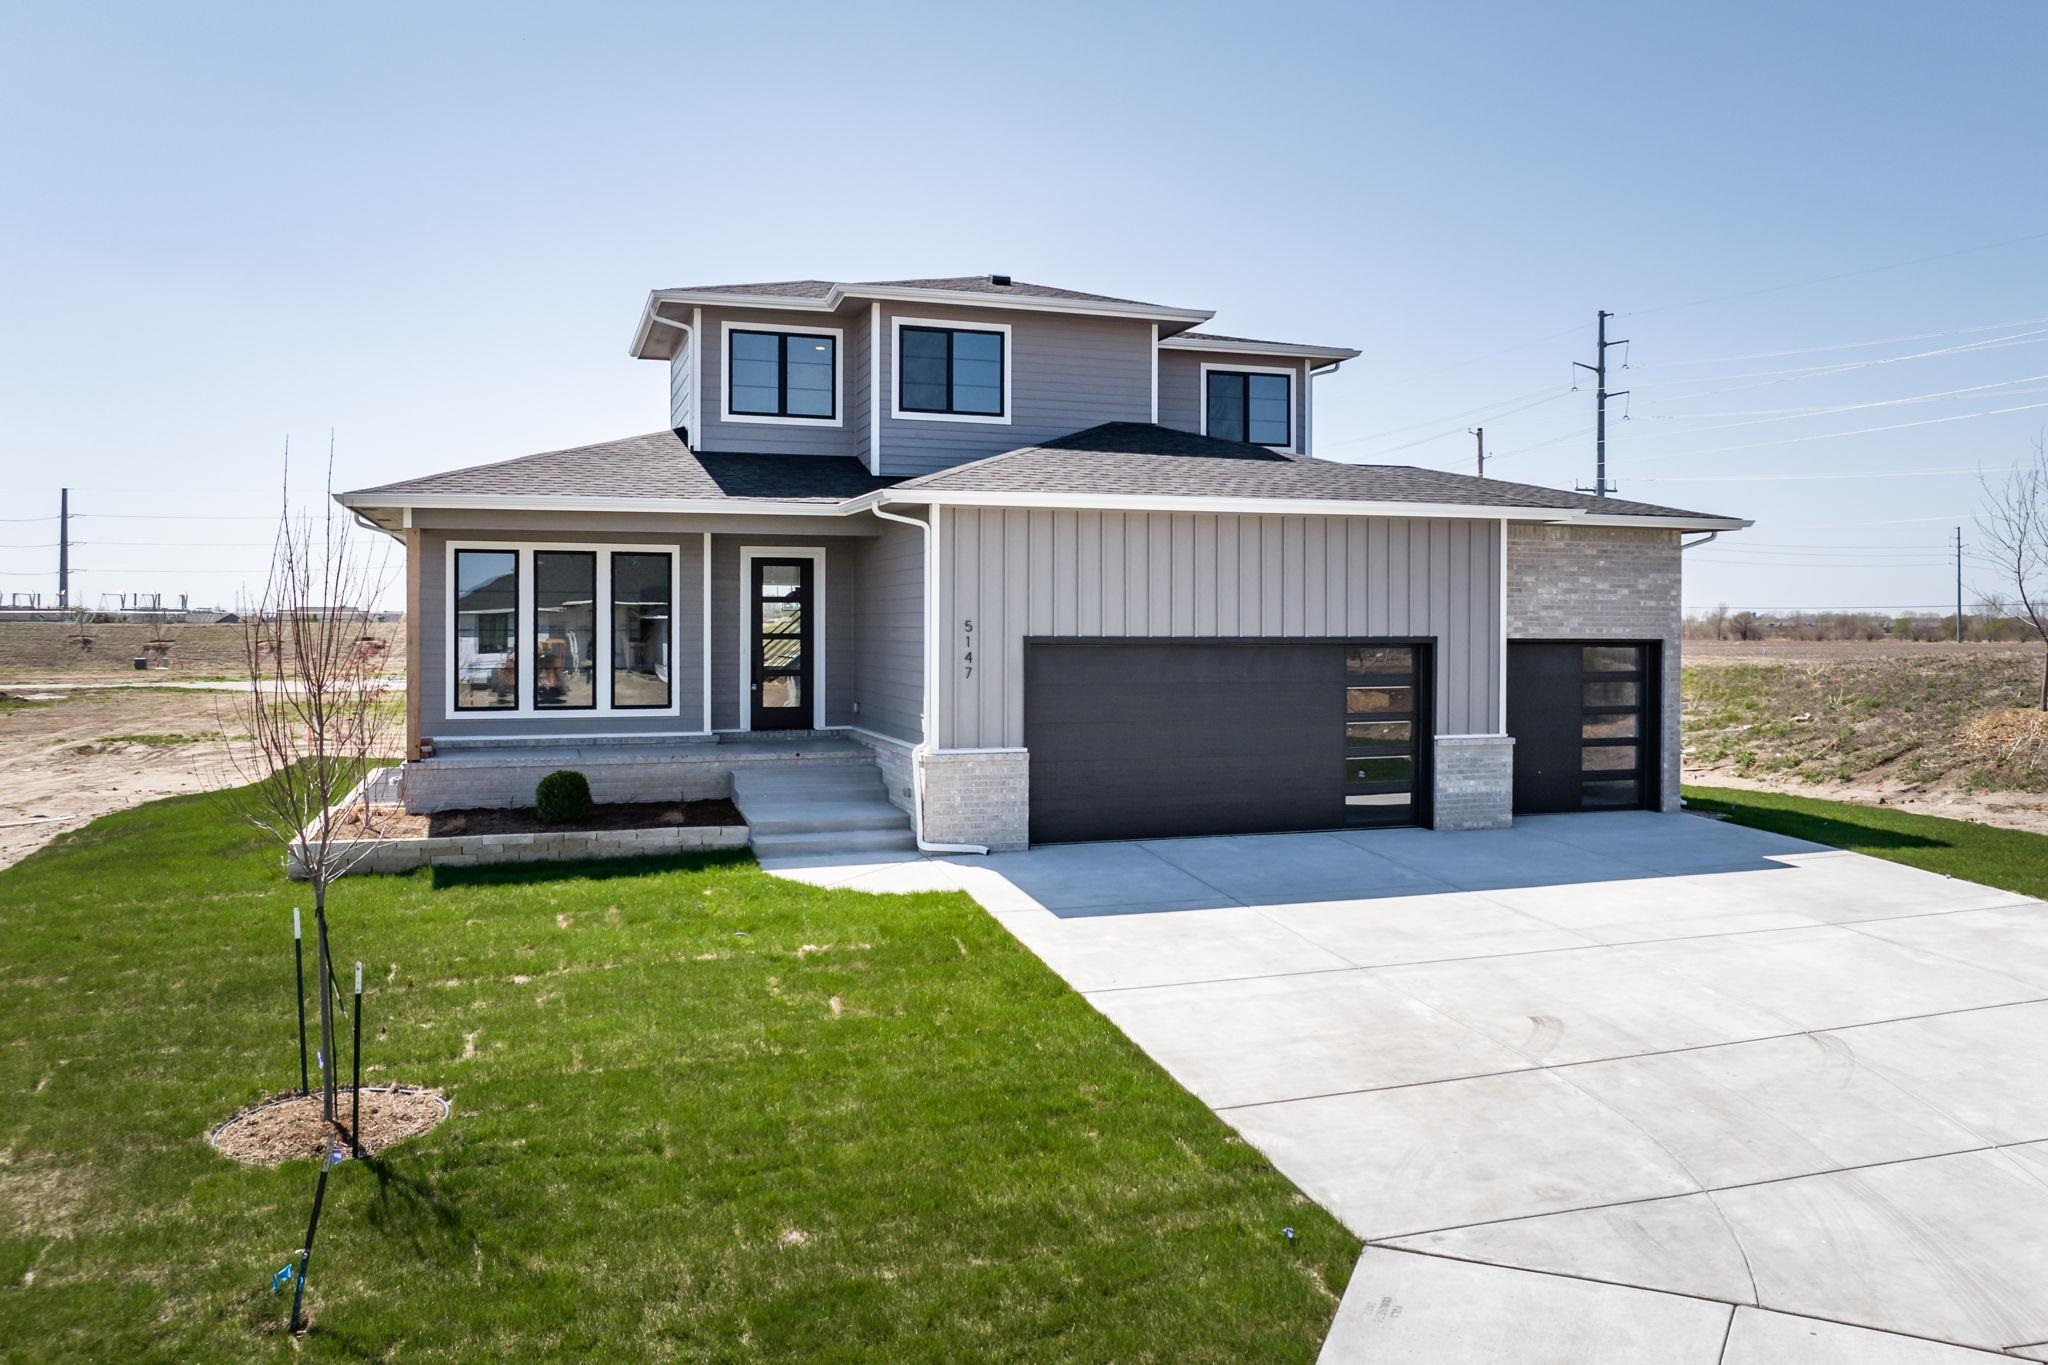 Artistic Builders brings a lovely spacious 2 story home to The Coves.  Offering spacious square feet on the main floor with open concept and beautiful Modern design.